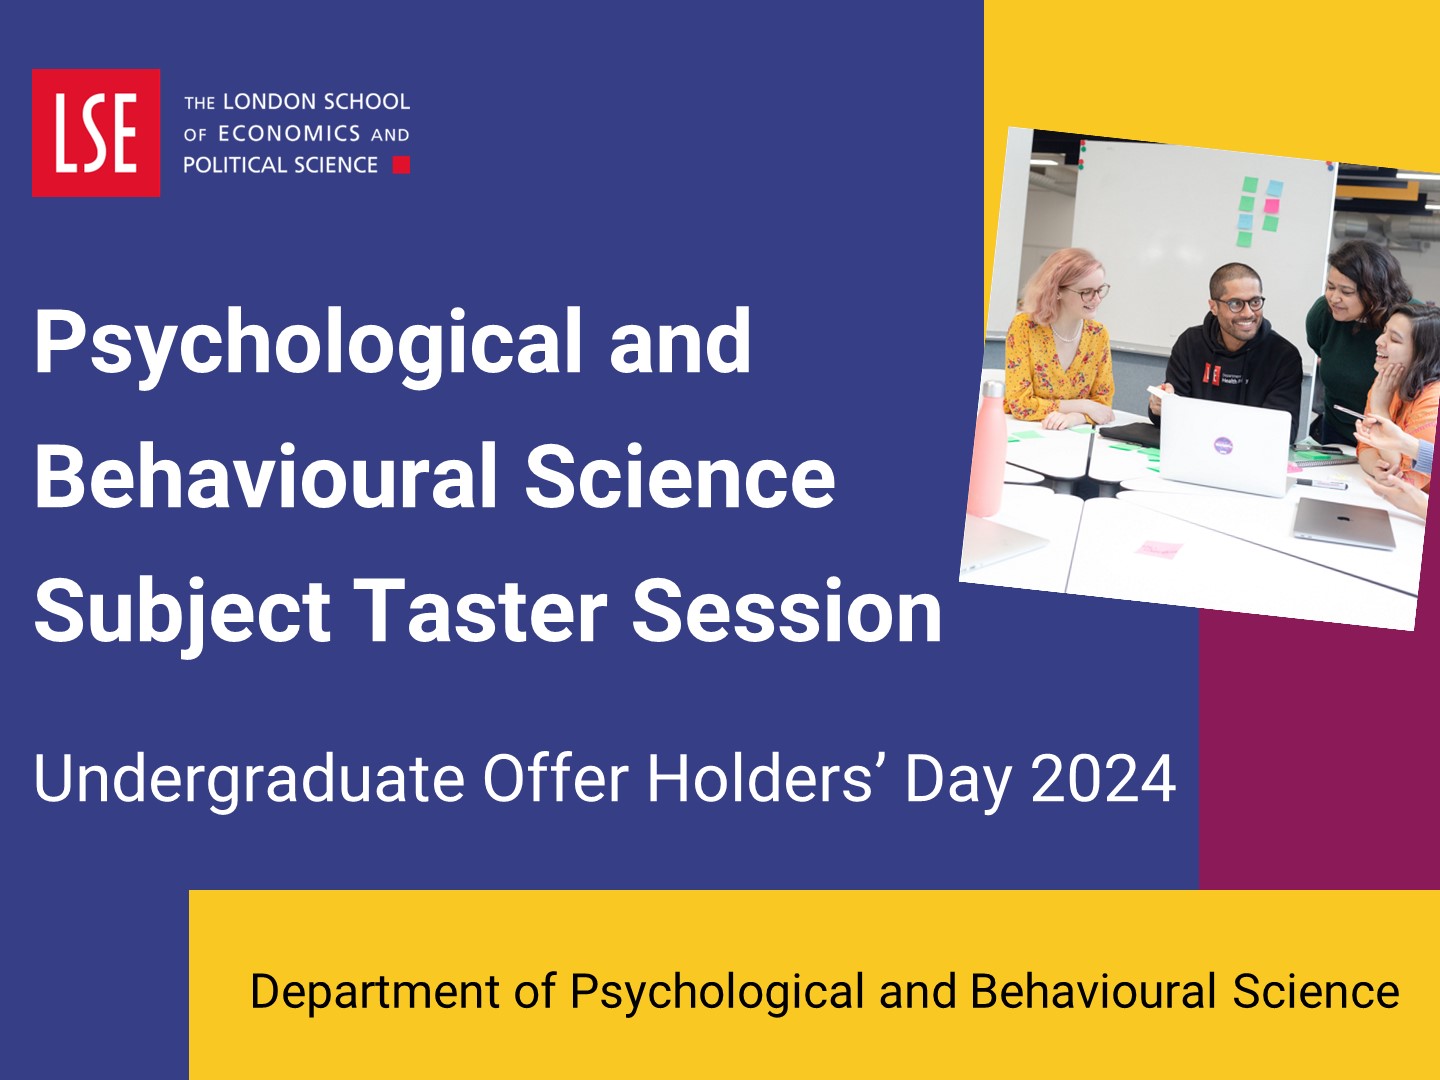 Watch the psychological and behavioural science subject taster session